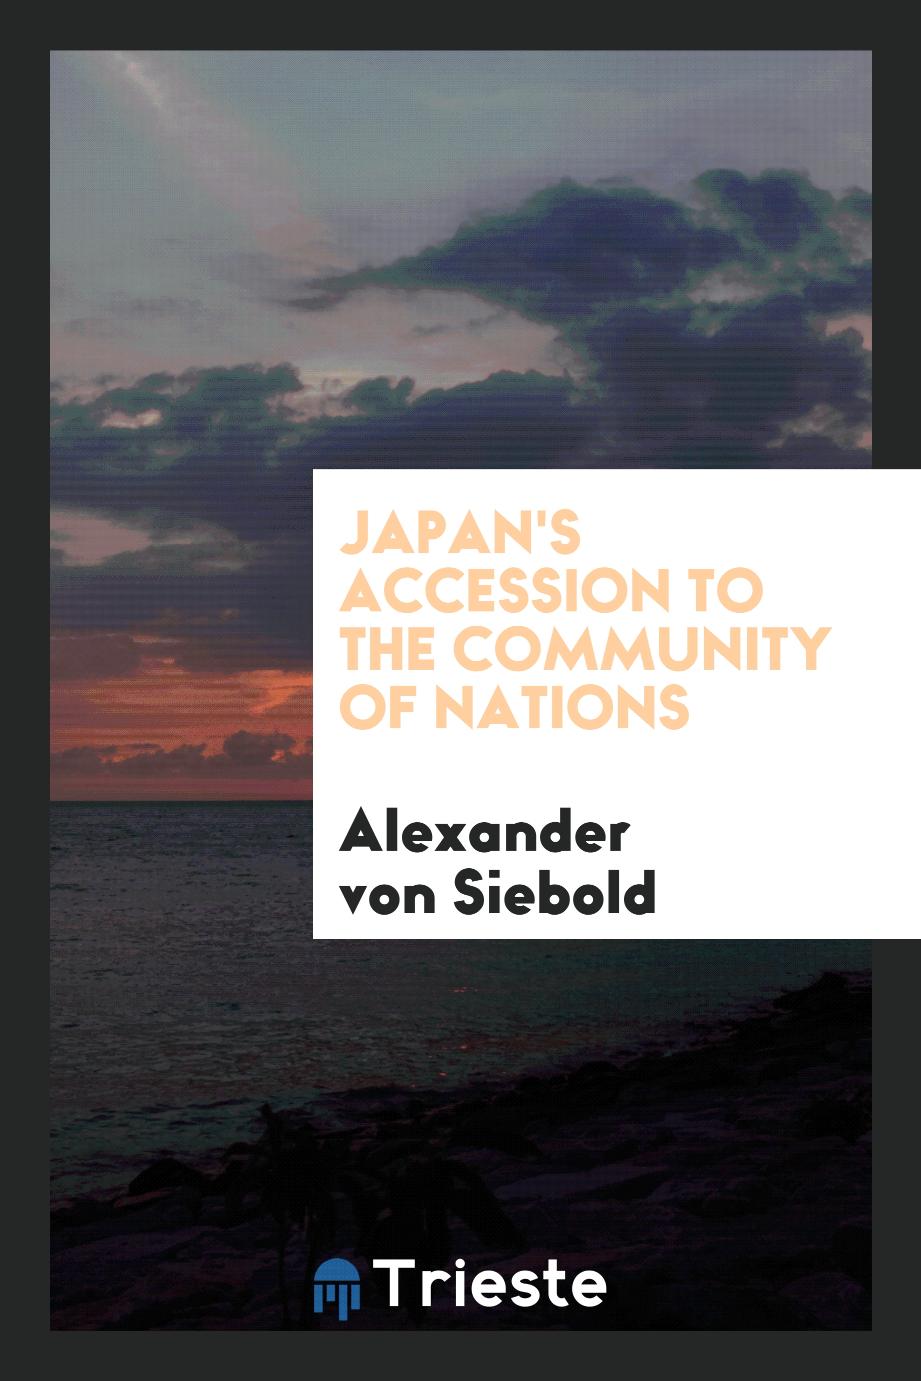 Japan's Accession to the Community of Nations